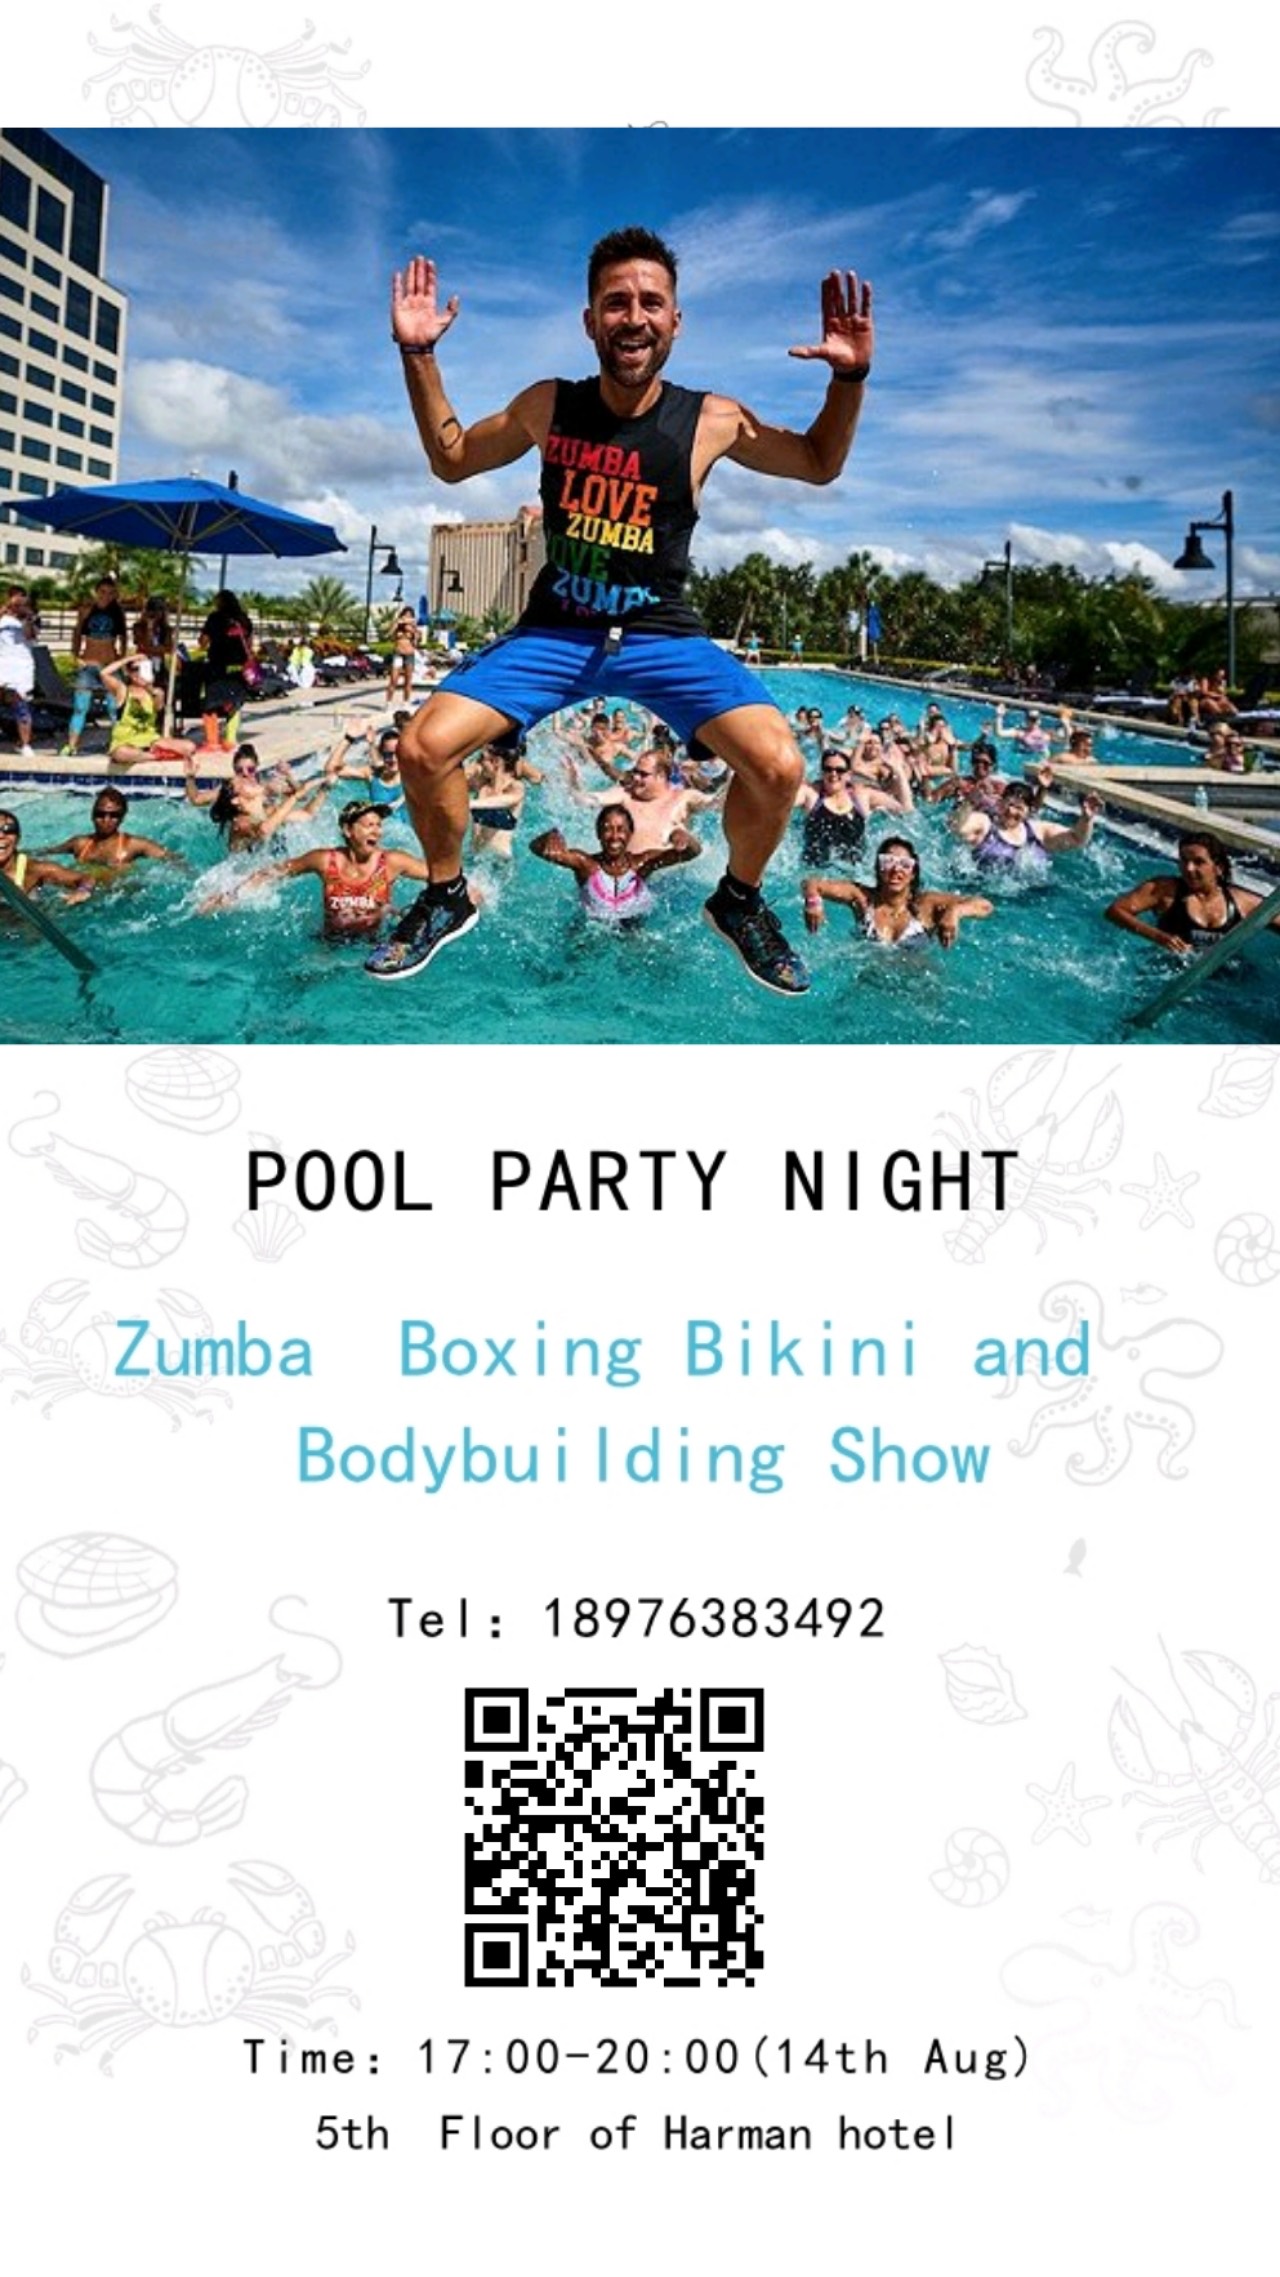 pool-party-and-zumba-night.jpg